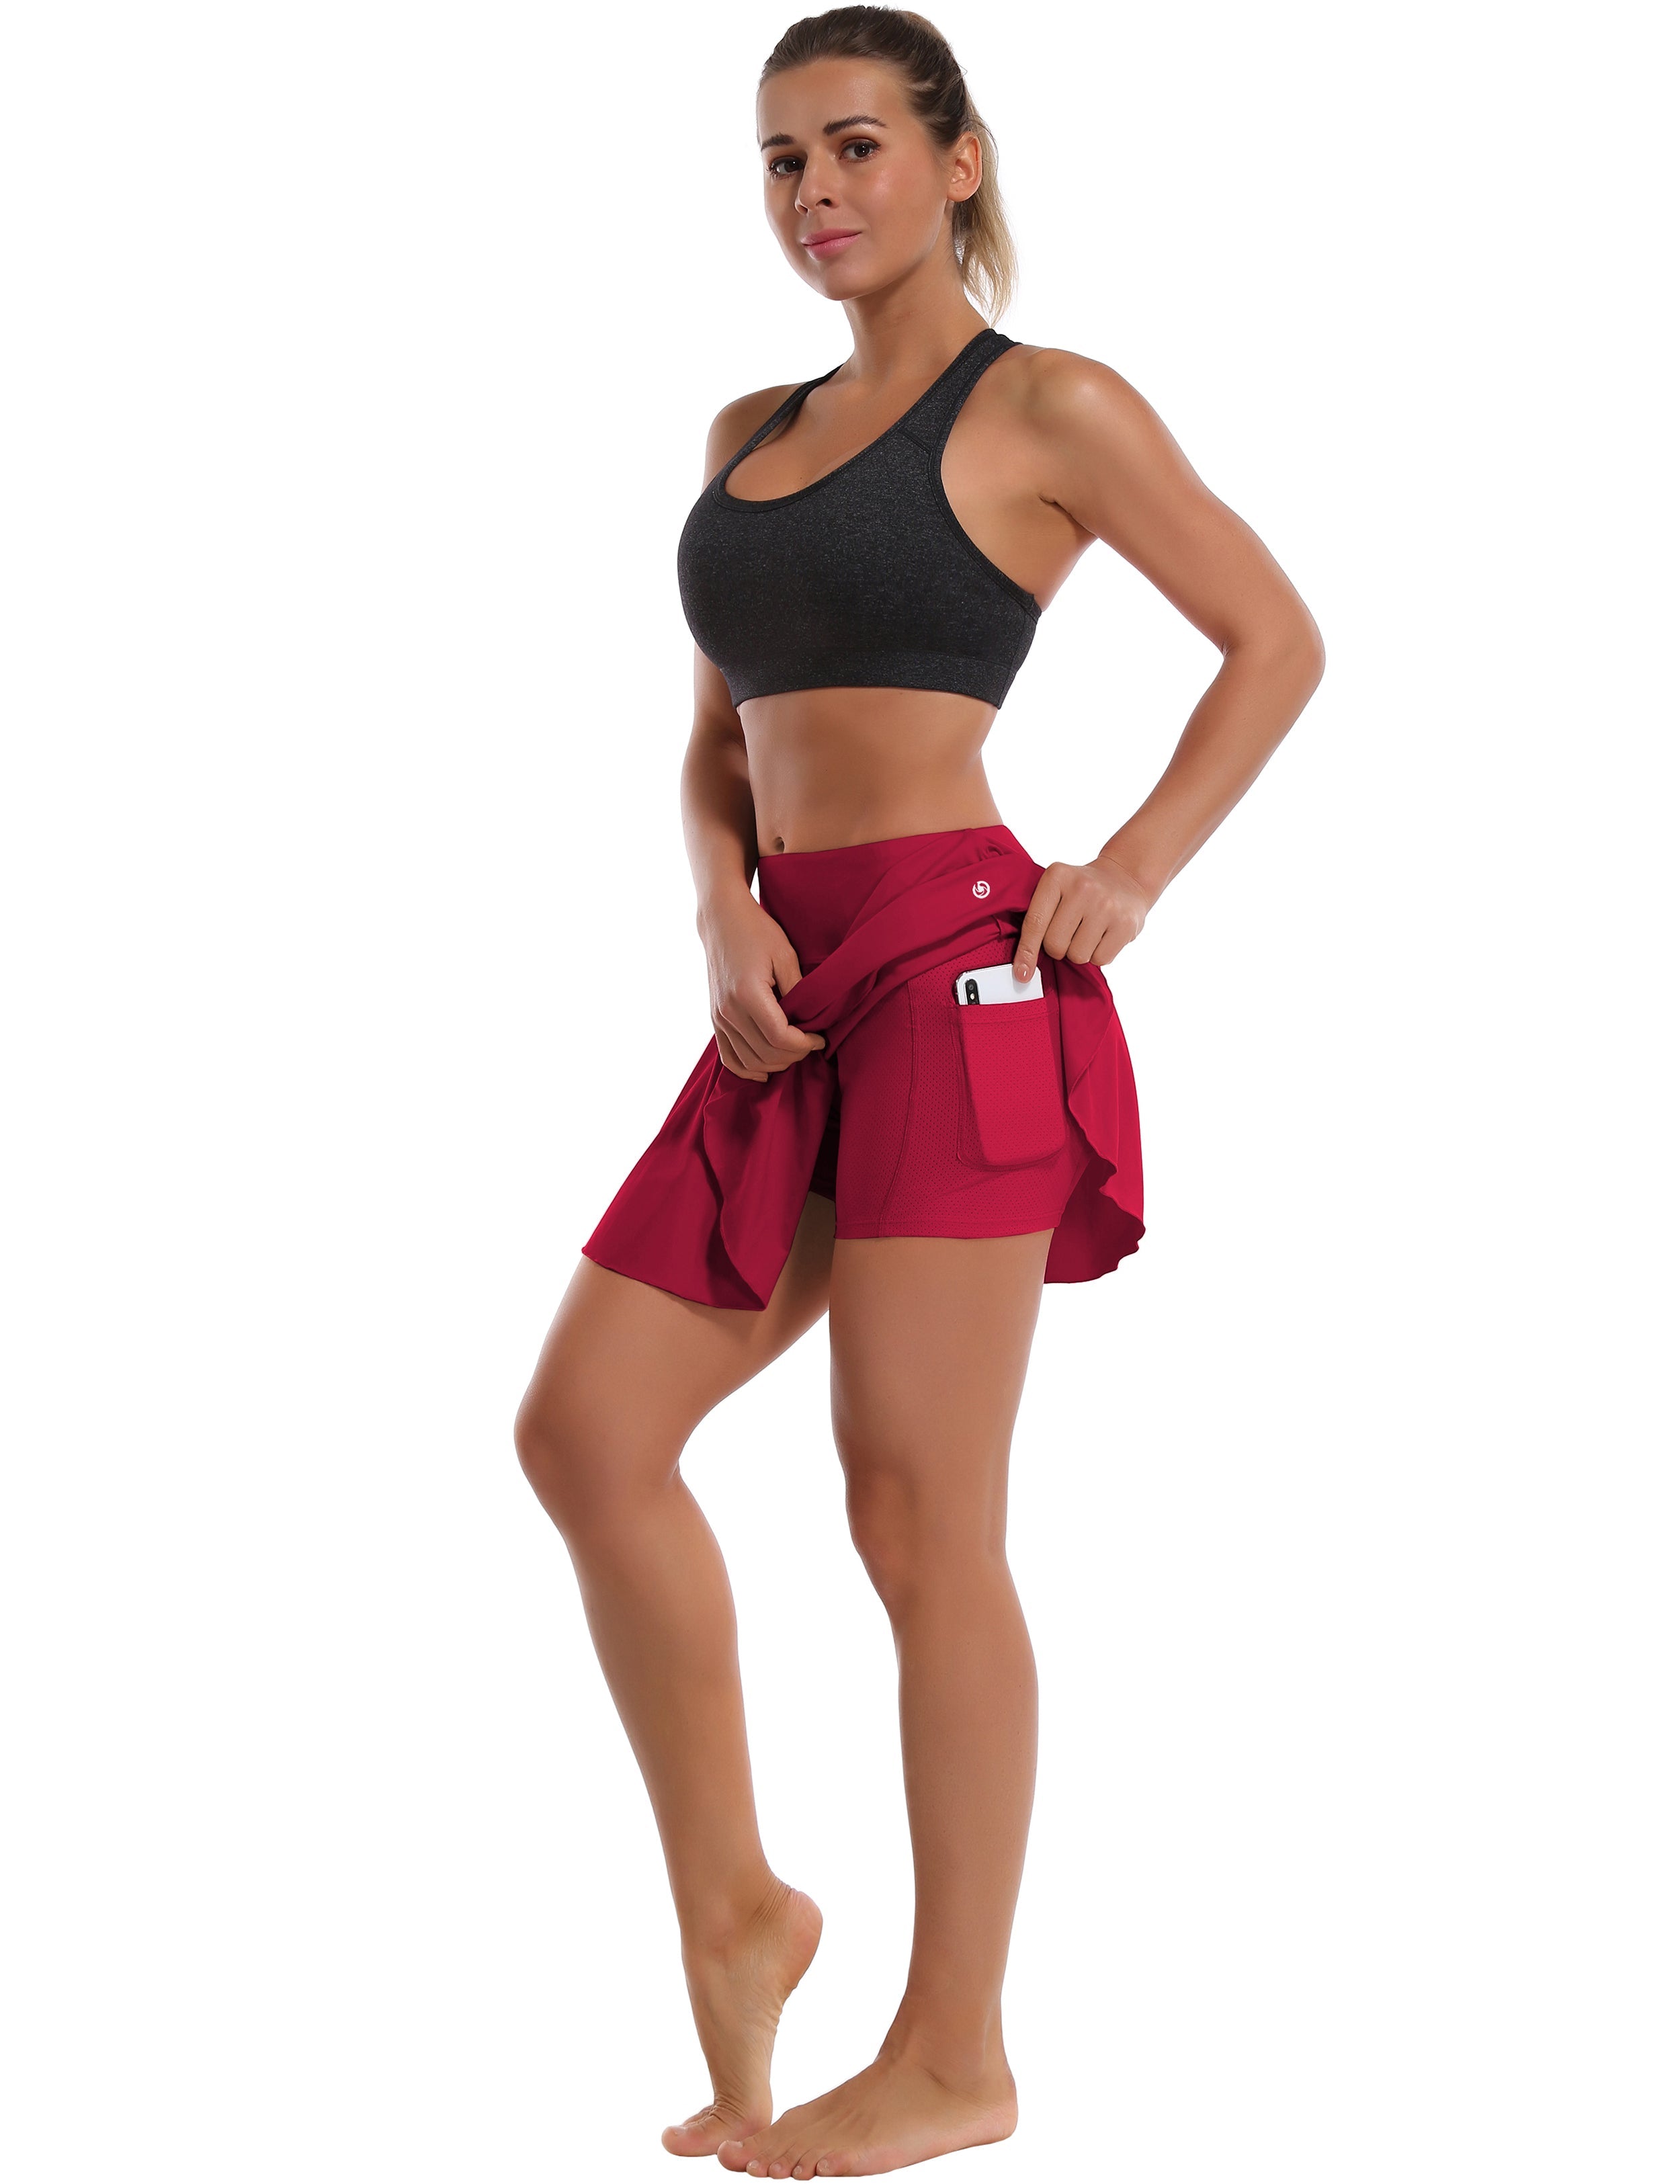 Athletic Tennis Golf Pleated Skort Awith Pocket Shorts rosecoral 80%Nylon/20%Spandex UPF 50+ sun protection Elastic closure Lightweight, Wrinkle Moisture wicking Quick drying Secure & comfortable two layer Hidden pocket